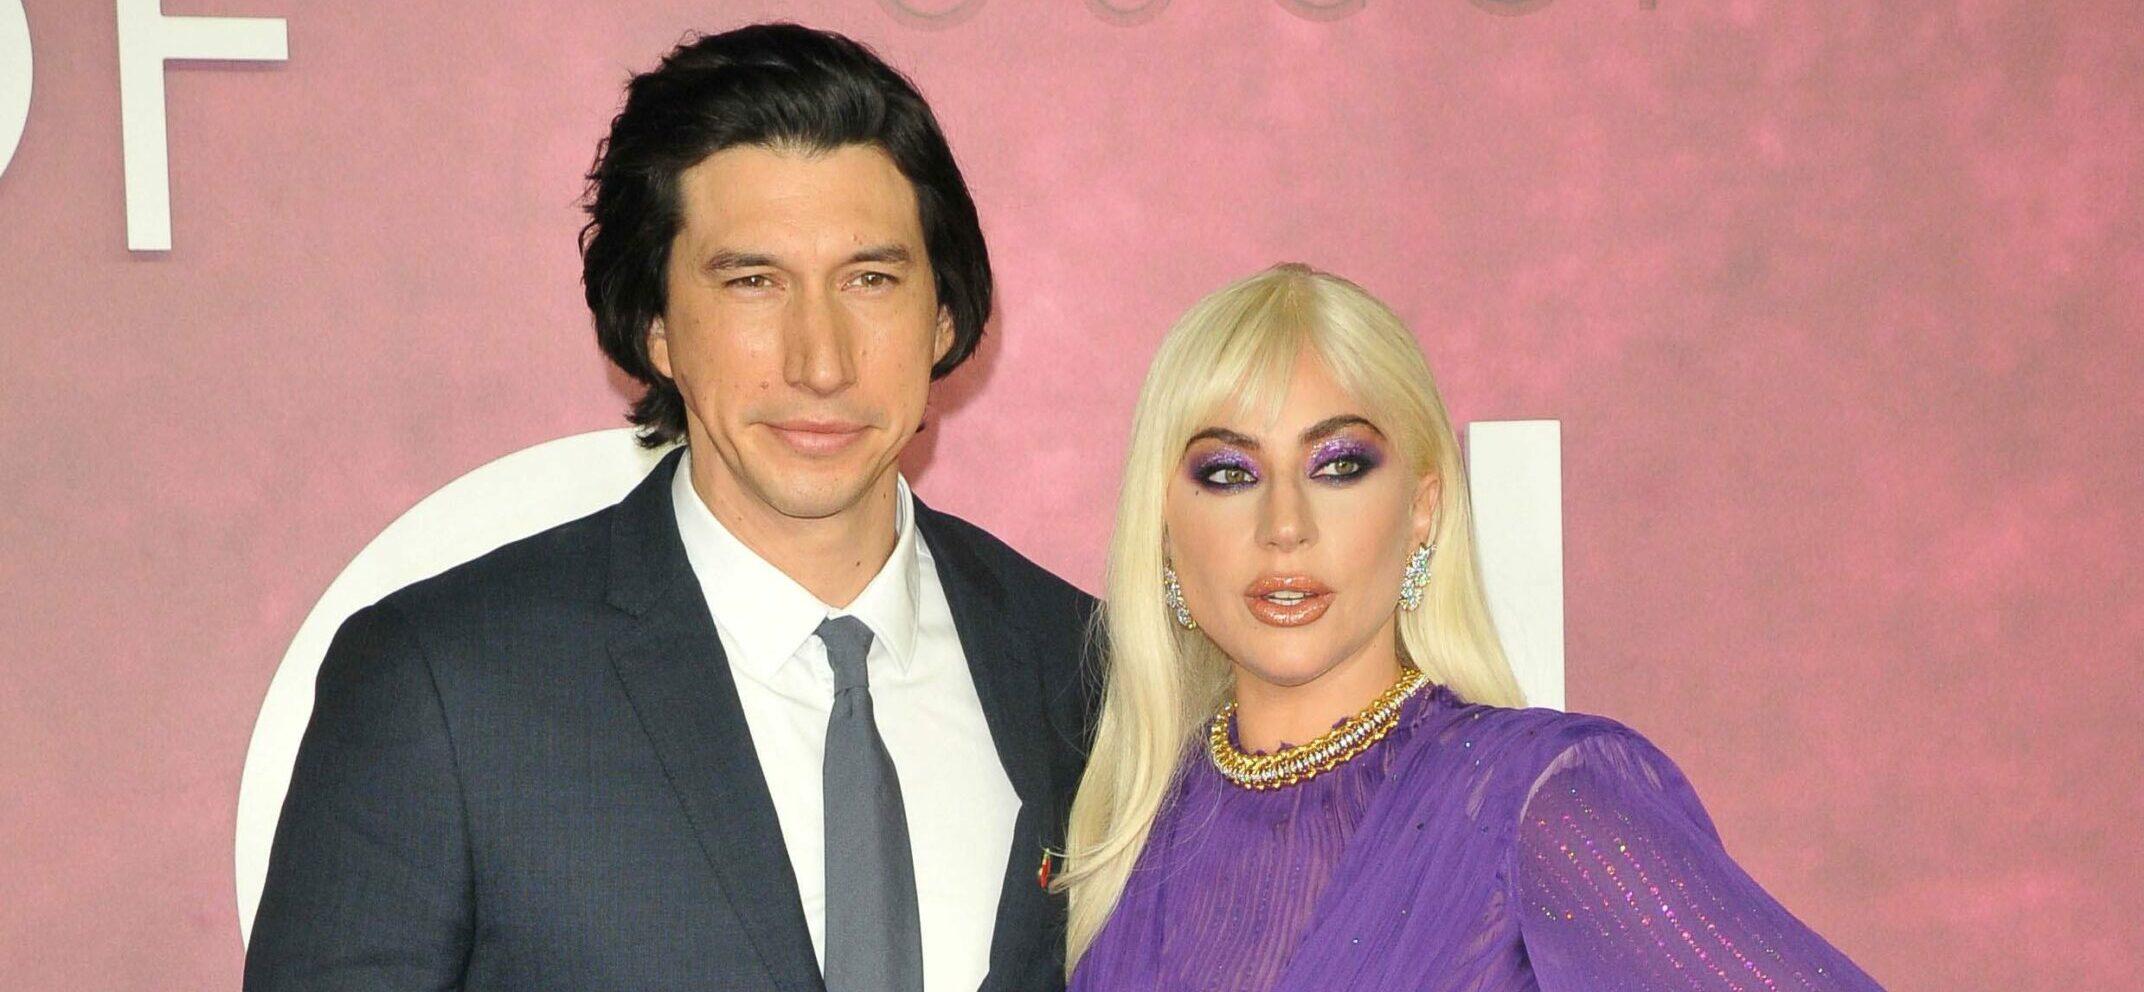 Lady Gaga And Adam Driver Show Sizzling Chemistry At The ‘House Of Gucci’ World Premiere In London